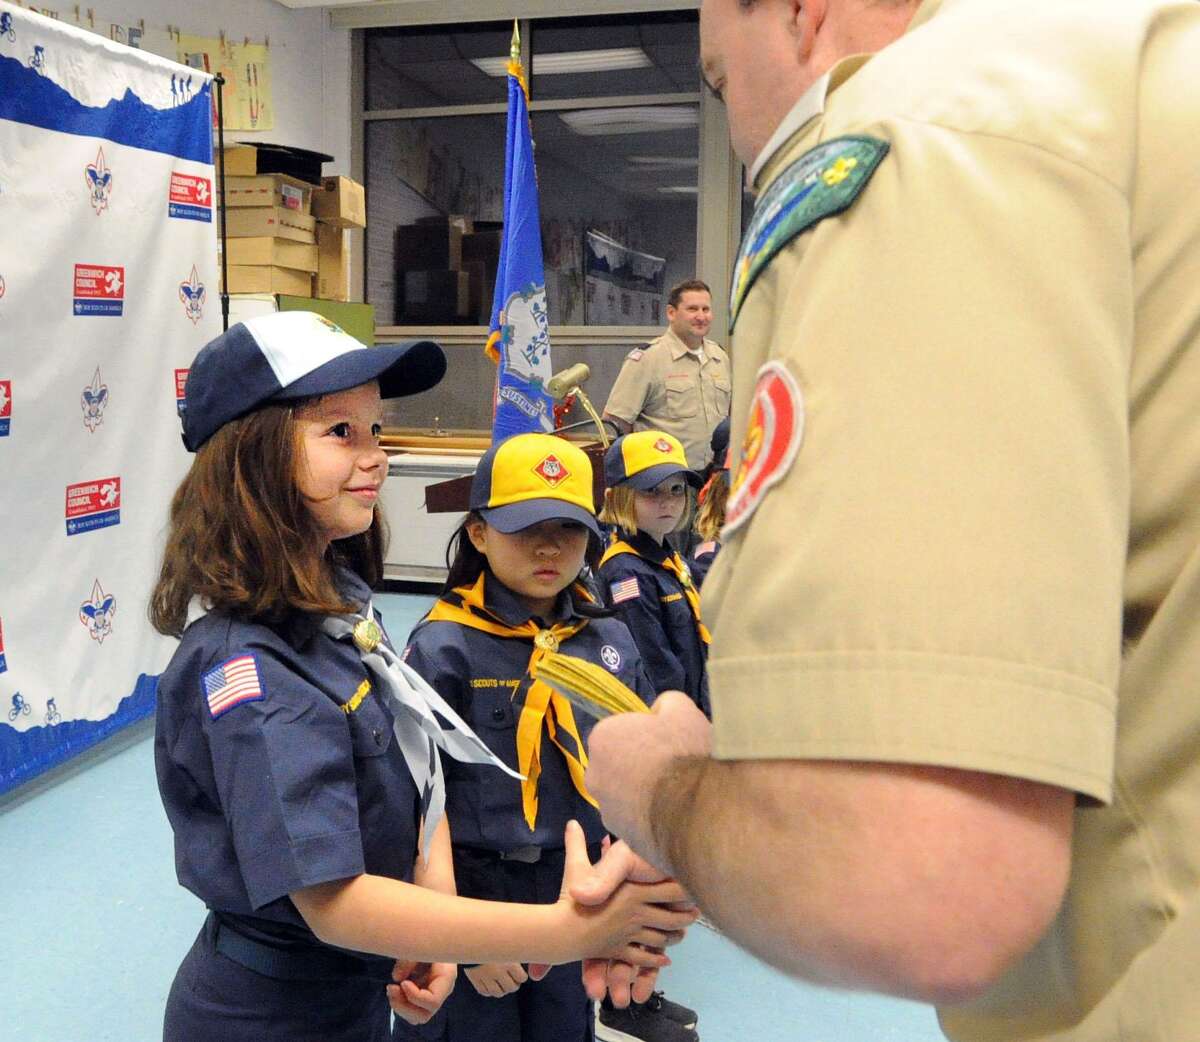 New Cub Scout Addie Healy, left, shakes hands during her Boy Scouts of America, Greenwich Council, Pack 23 of North Mianus, induction ceremony at North Mianus School in Greenwich, Conn., Thursday night, Feb. 8, 2018.